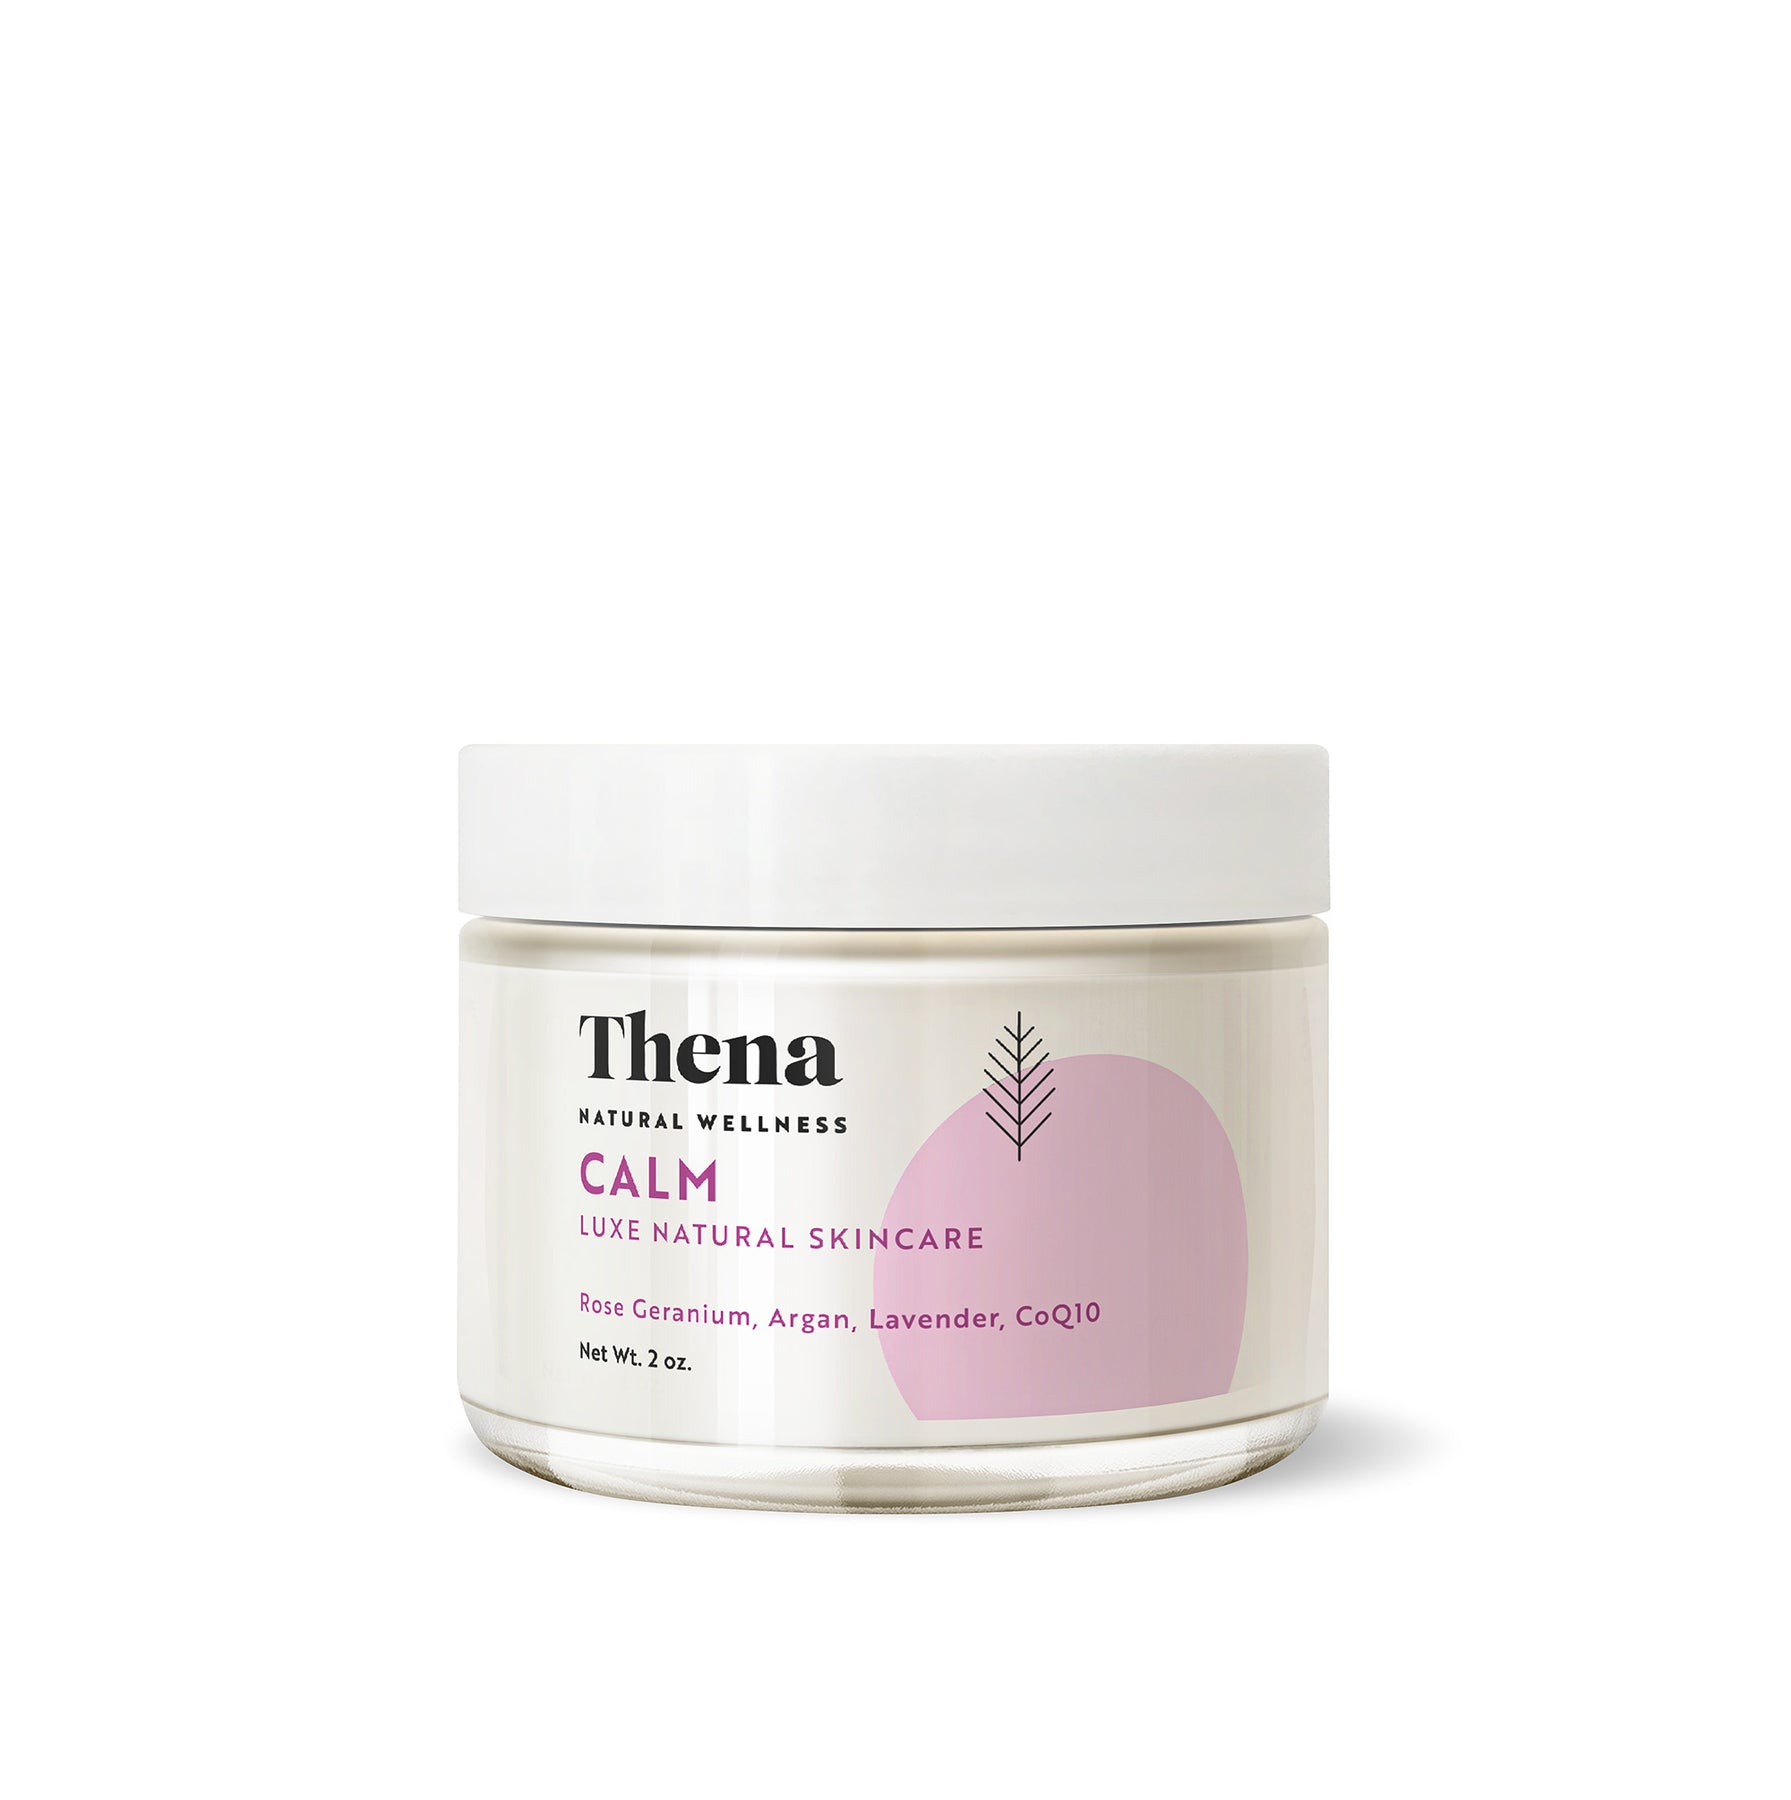 Thena Calm Luxe Natural Skincare